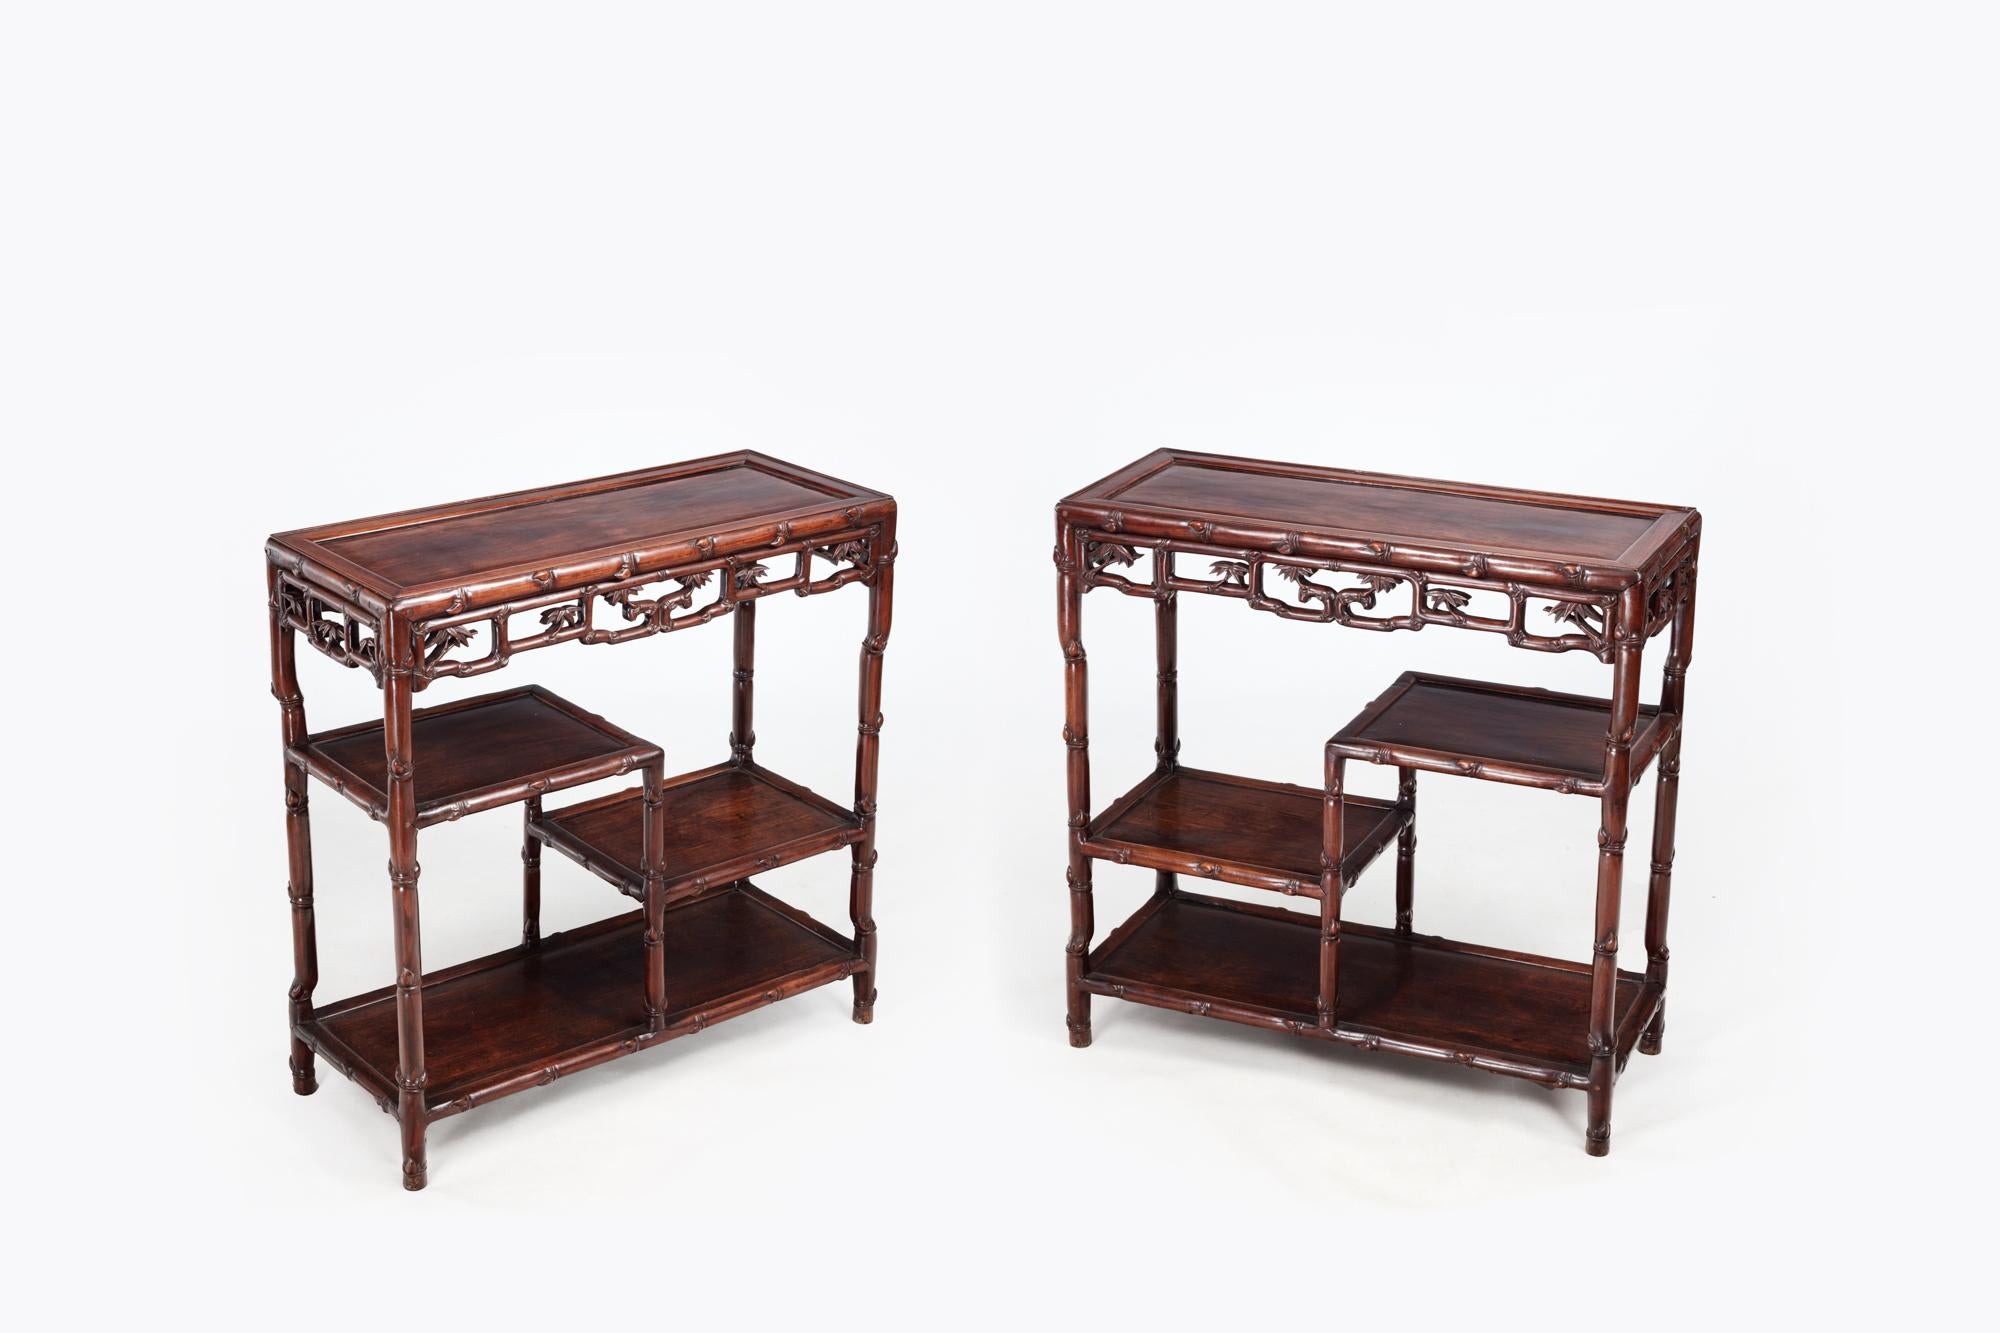 Pair of 19th Century Chinese Hong mu hardwood side tables featuring stepped display shelves. The panel tops above recessed friezes and aprons, raised on handcarved legs ending in shaped feet. The pair showcase richly textured, decorative handcarved